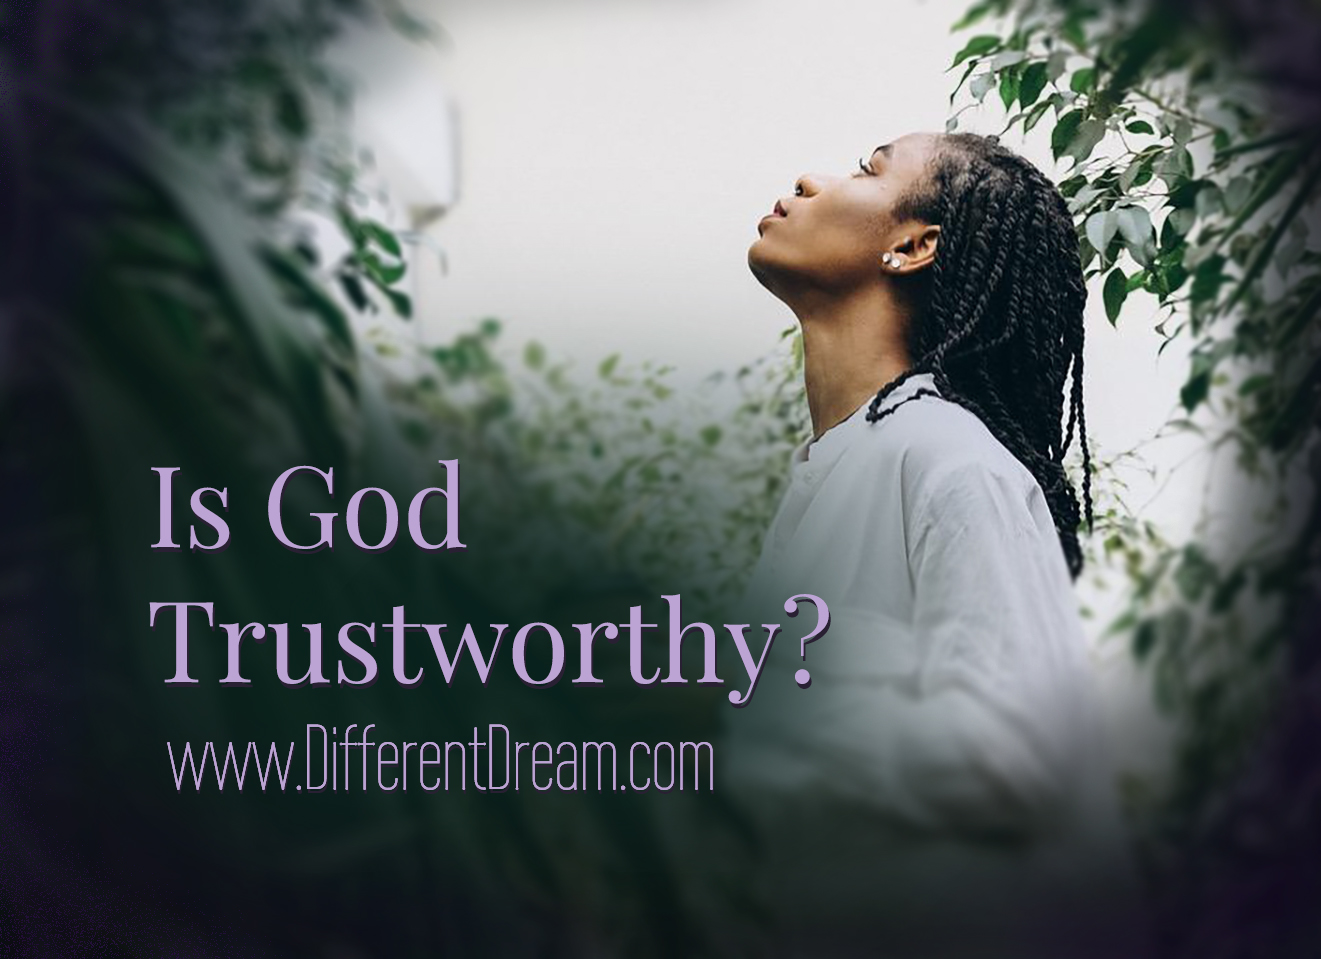 Sandy Ramsey-Trayvick explains that a true relationship with God enables her to say, "Lord, I don't understand, but I trust You."